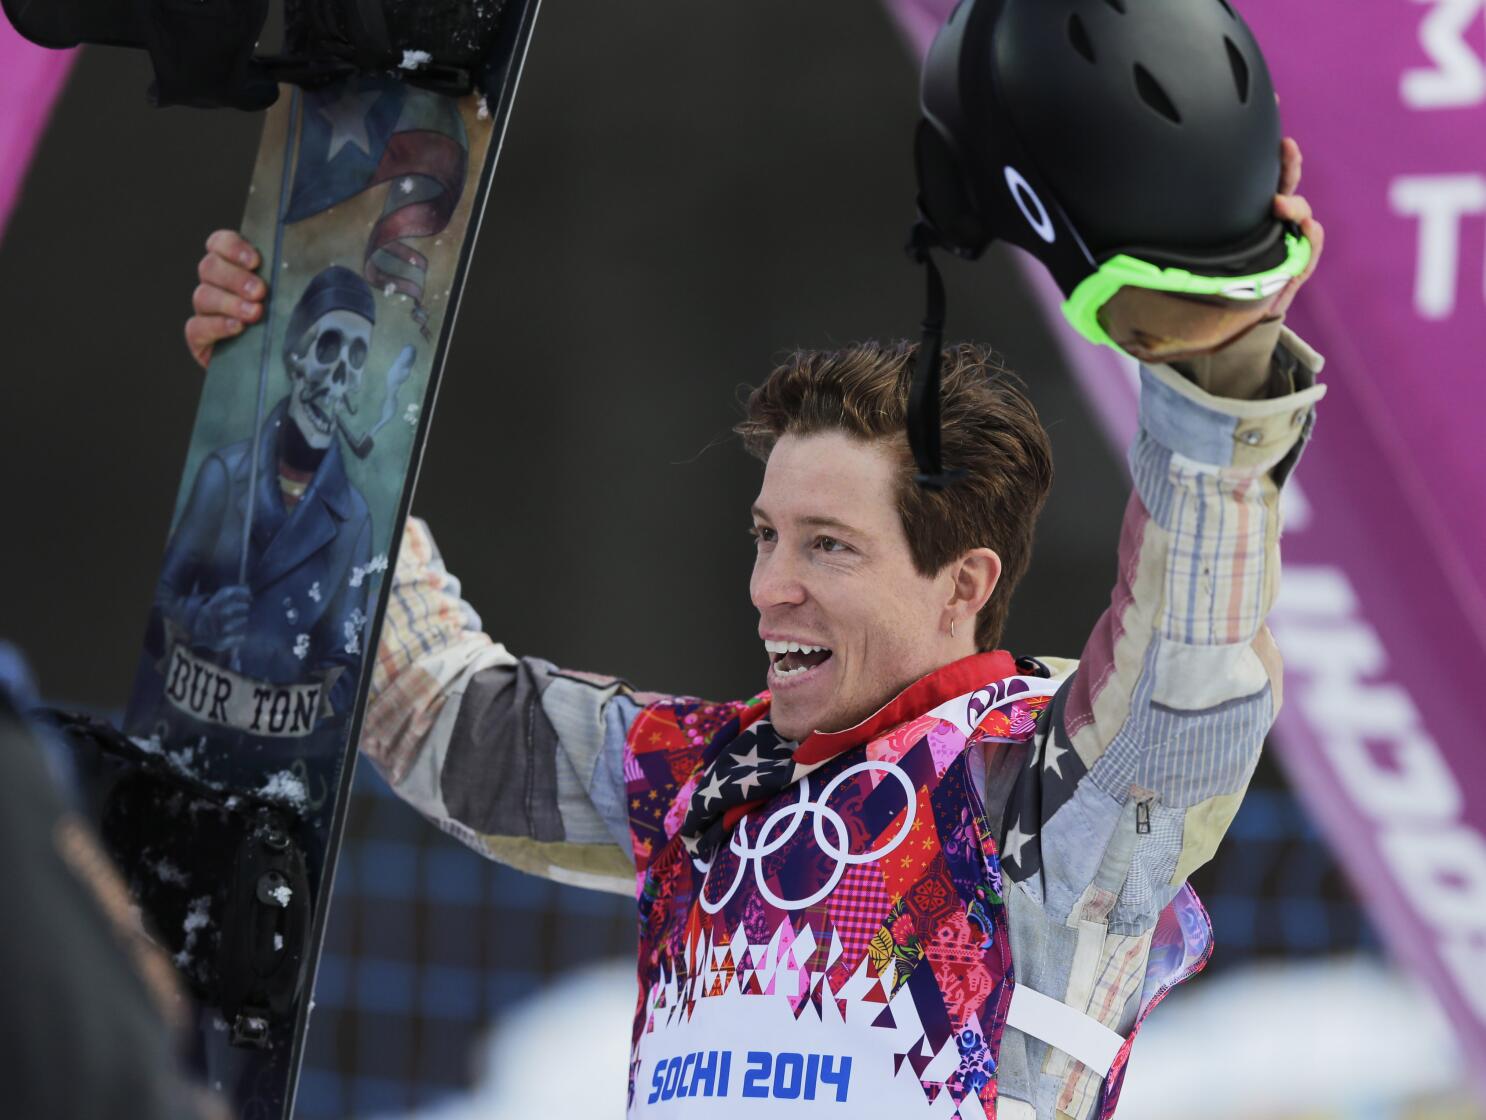 This weekend on the Road to the Olympics: Shaun White headlines